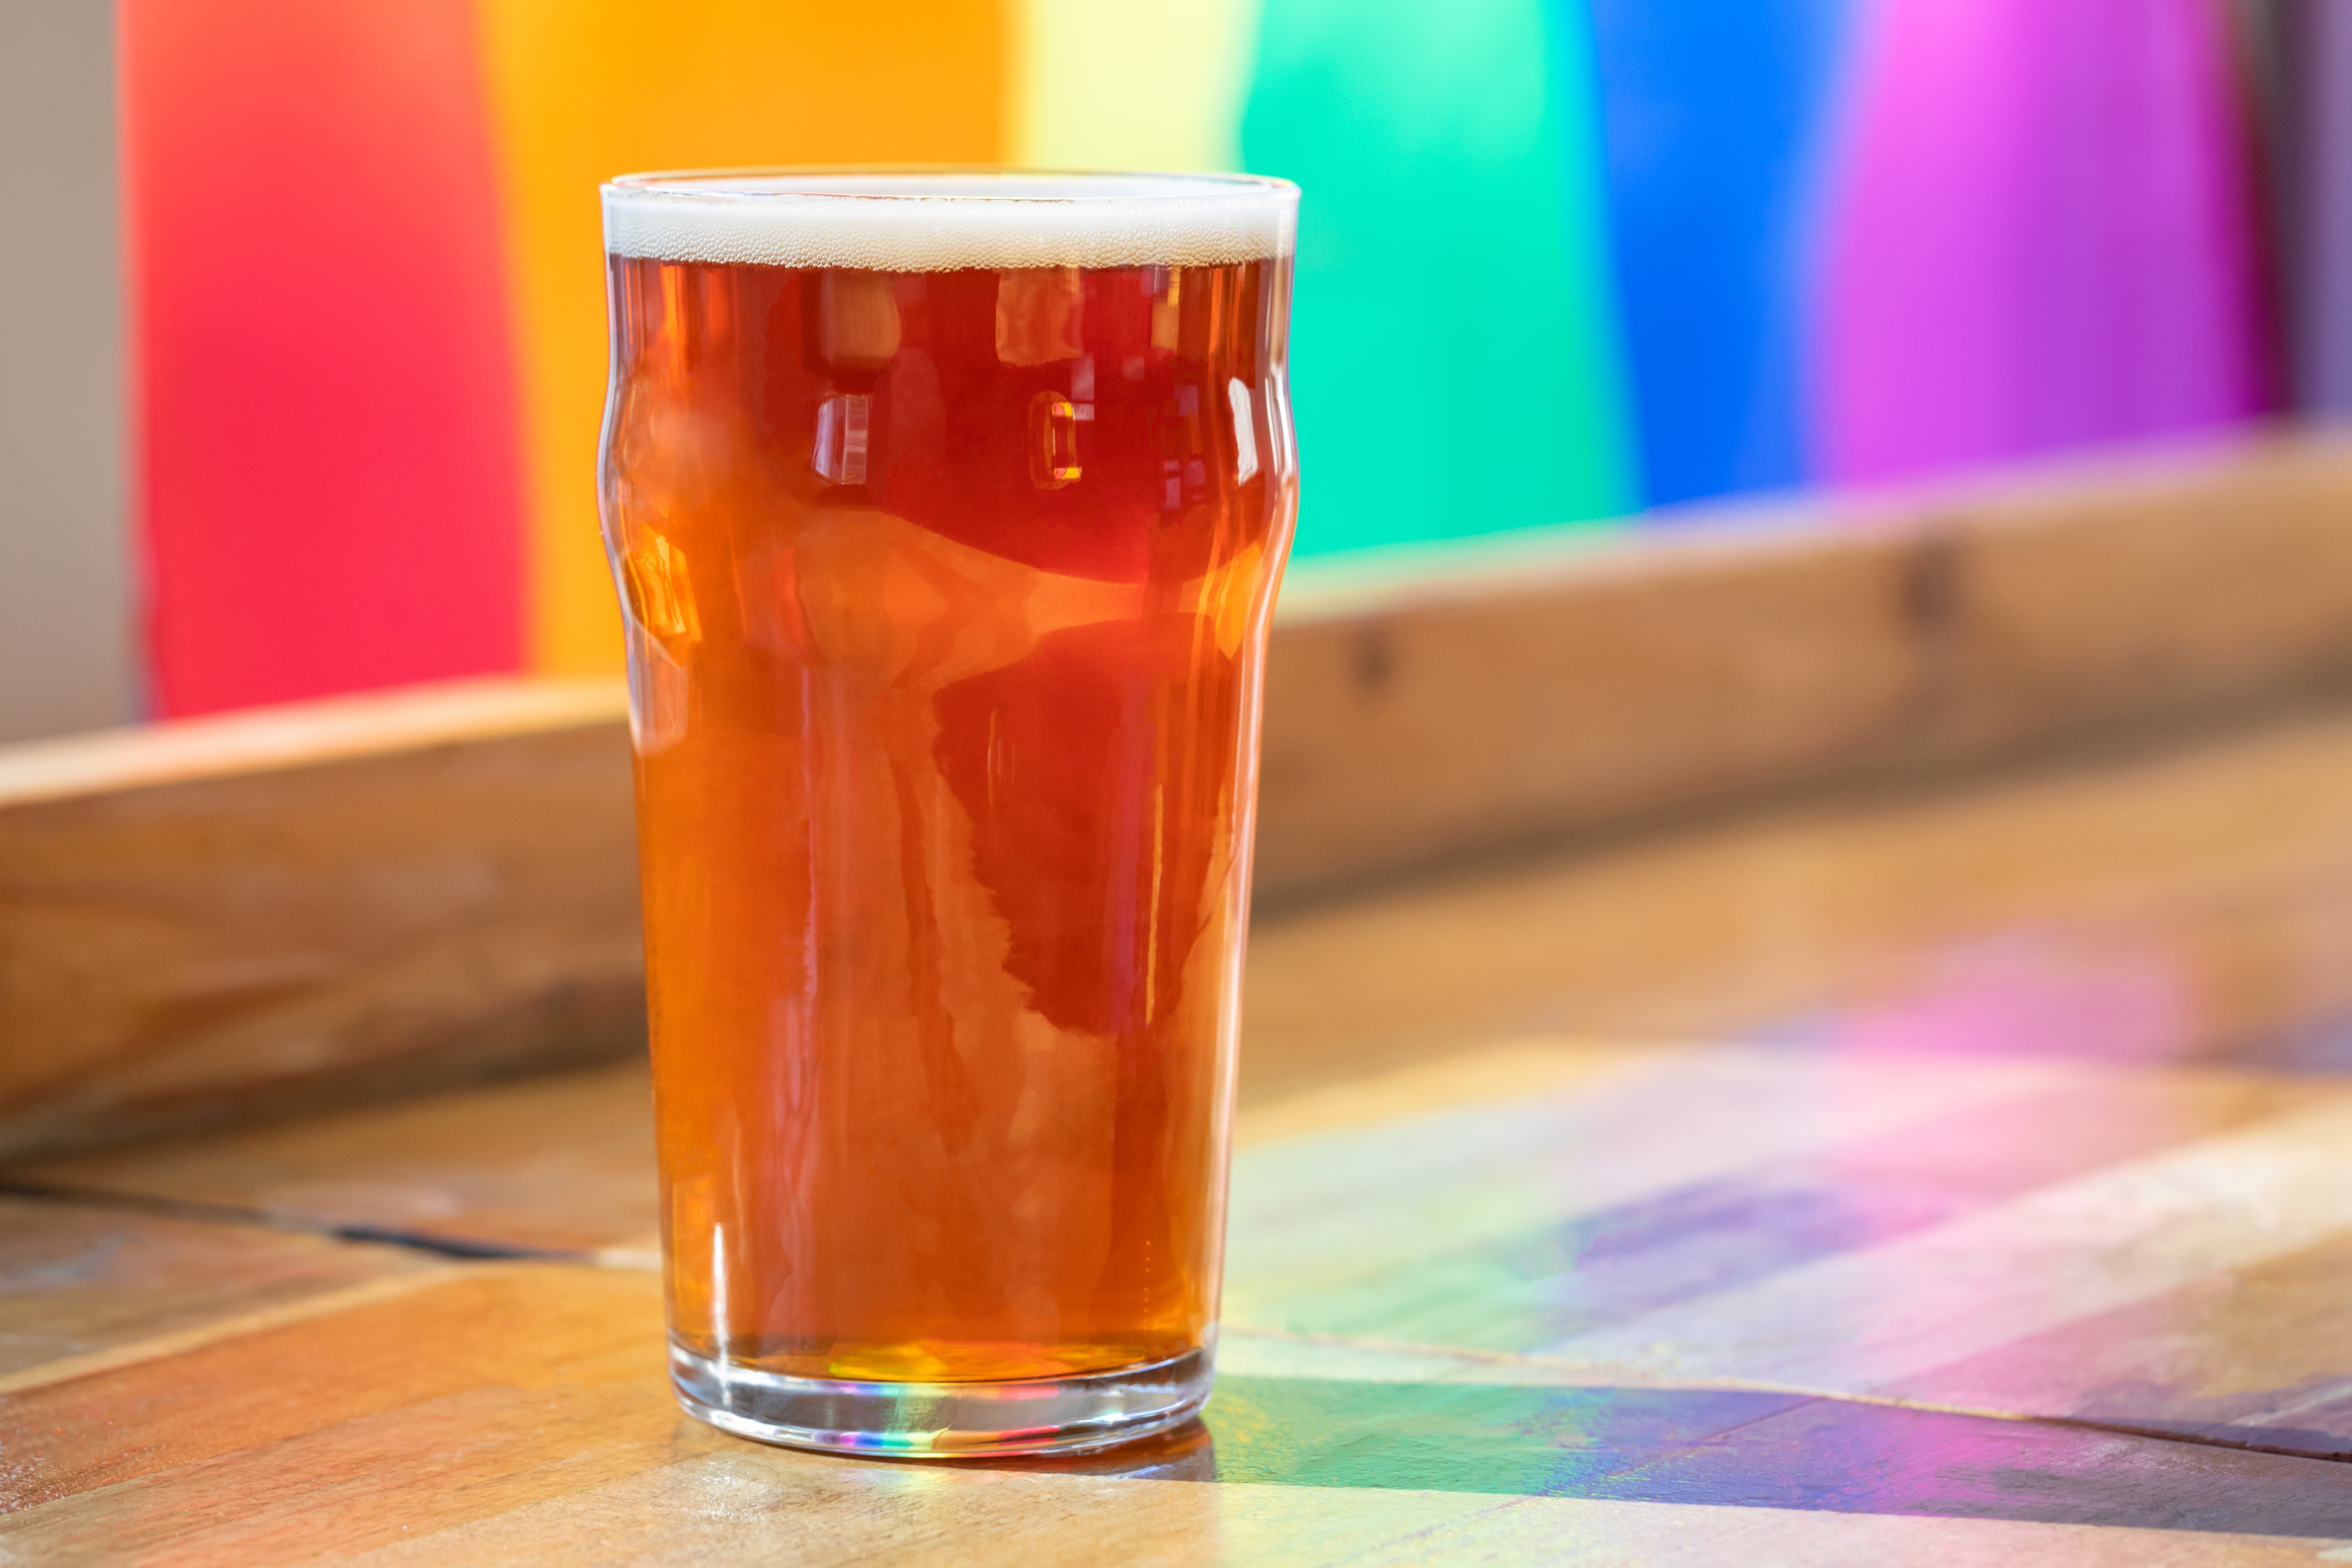 A glass of beer sits on a counter in front of a rainbow flag